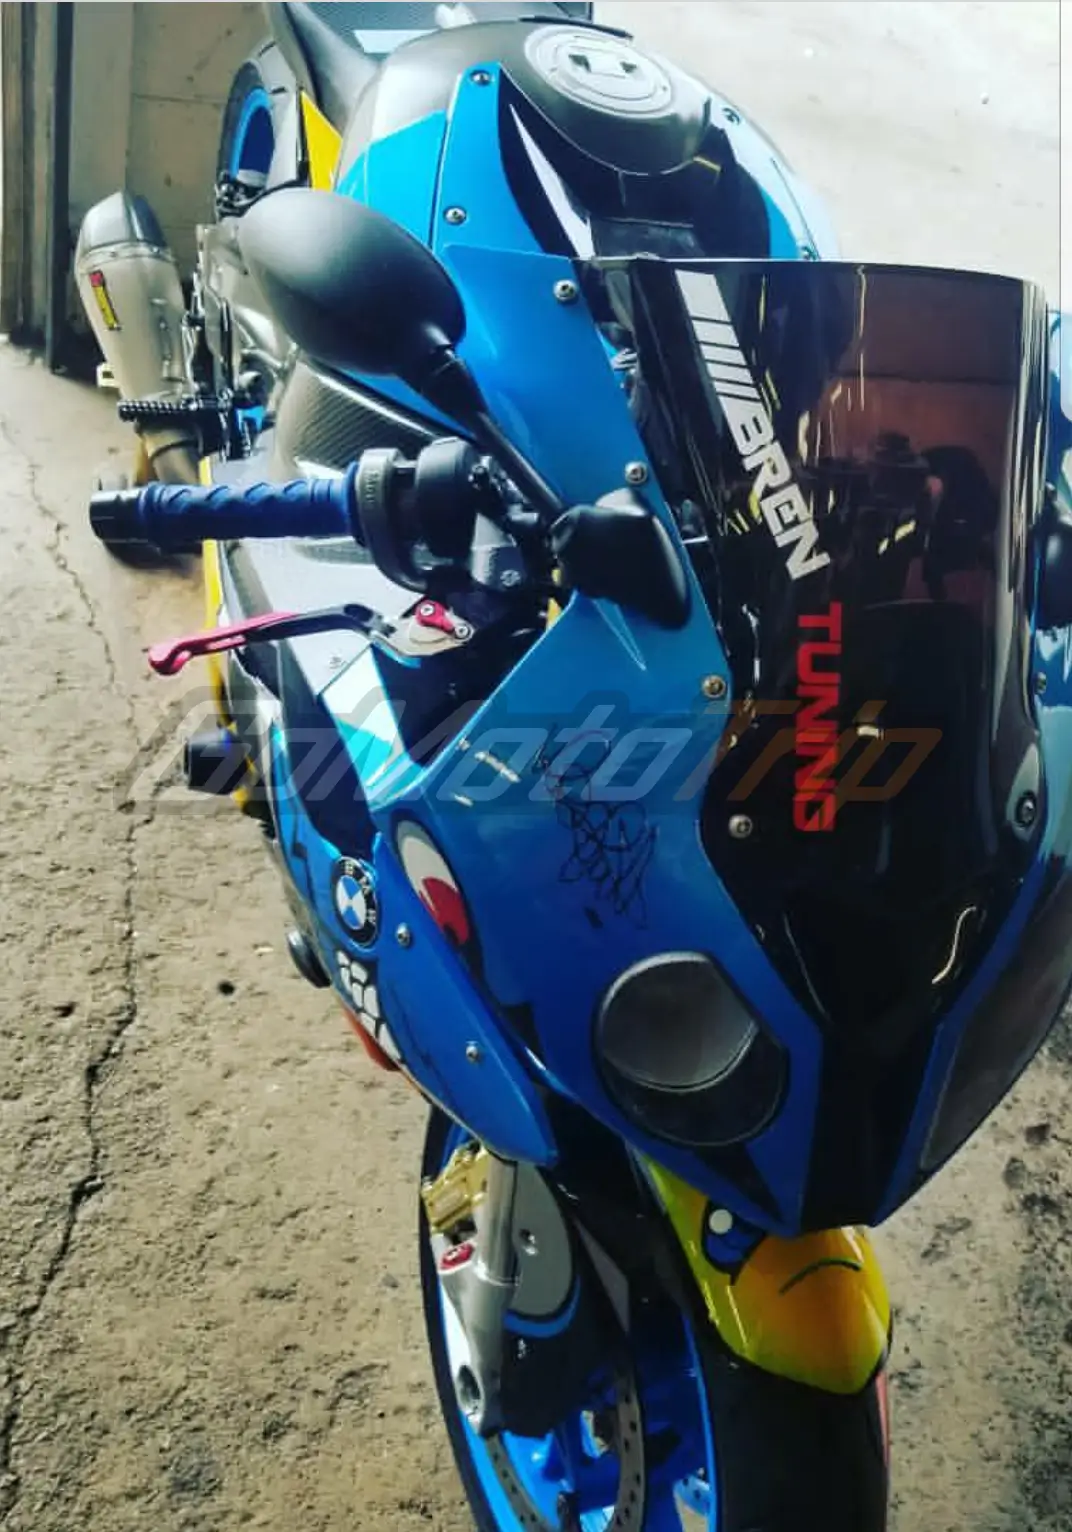 Rider Review Shawn Bmw S1000rr Rossi Shark Fairing 2